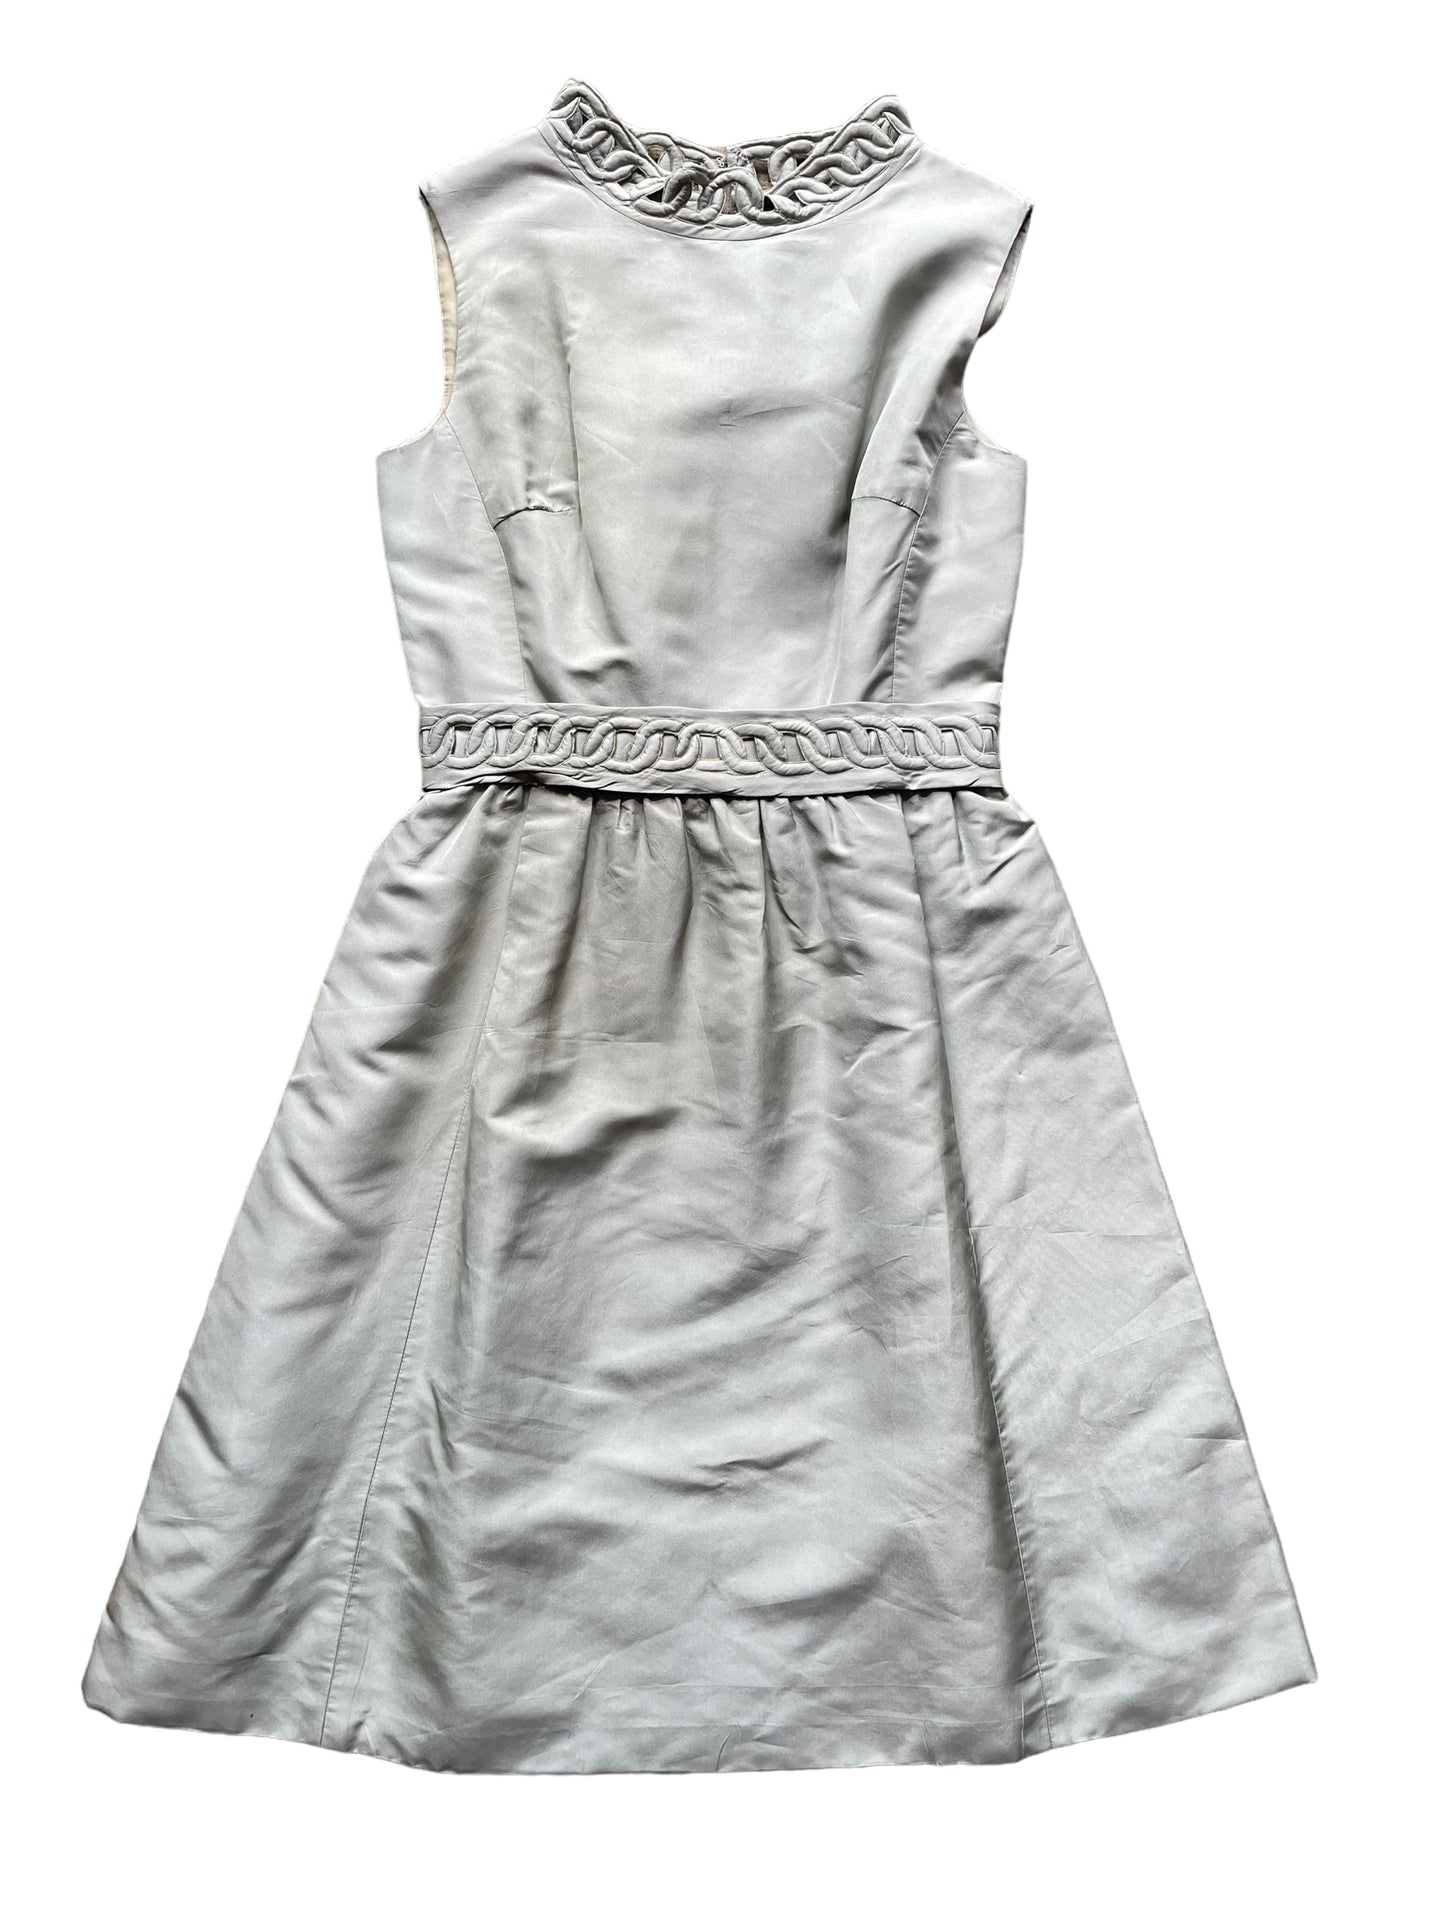 Full front view of Vintage 1950s Grey Satin Party Dress SZ M |  Barn Owl Vintage Dresses| Seattle Vintage Ladies Clothing